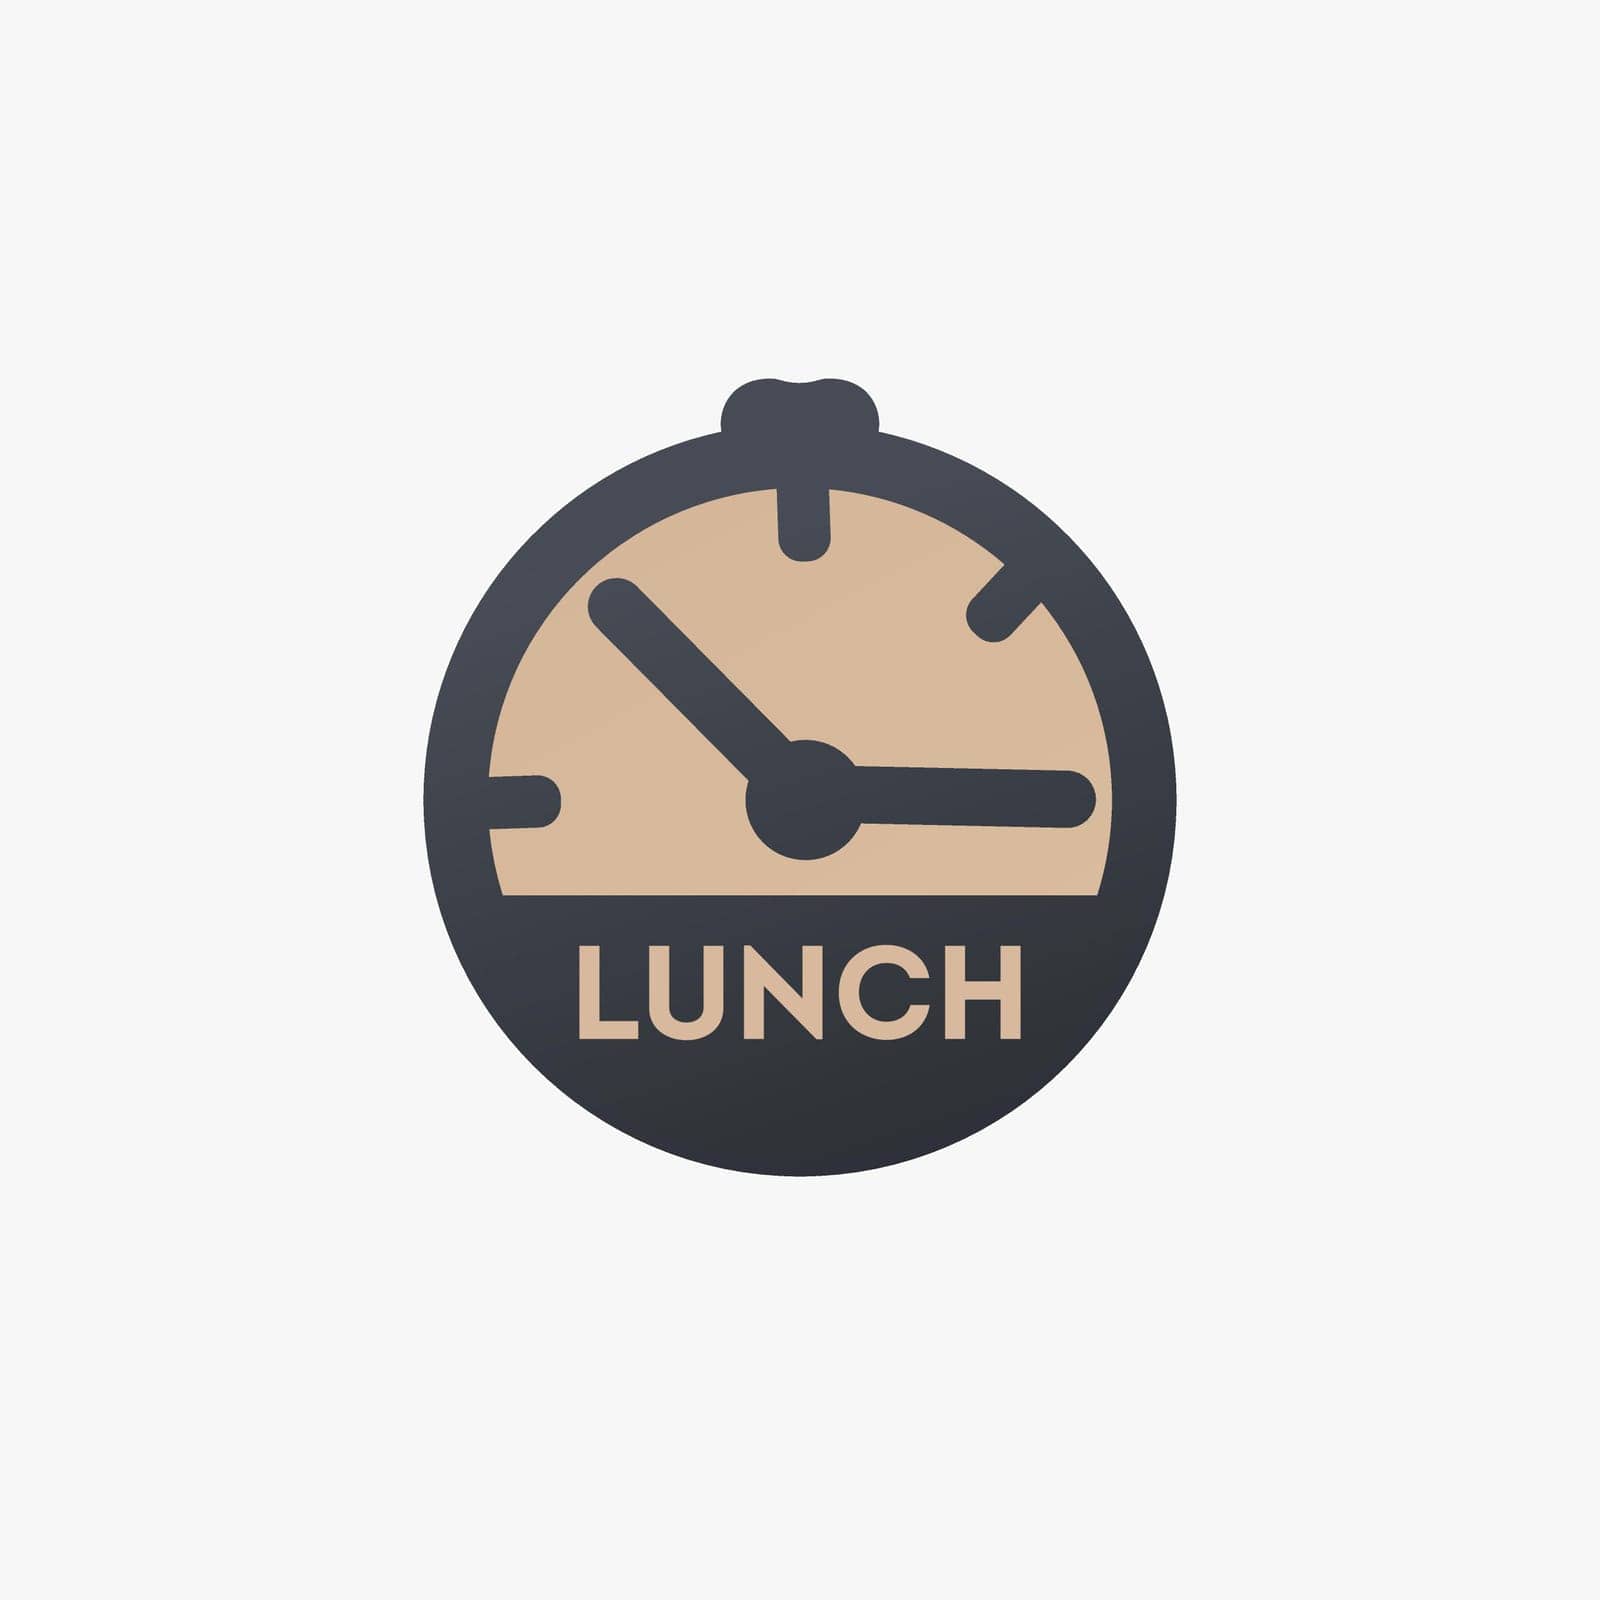 Time to eat lunch clock icon. Stock vector illustration isolated on white background. by Kyrylov